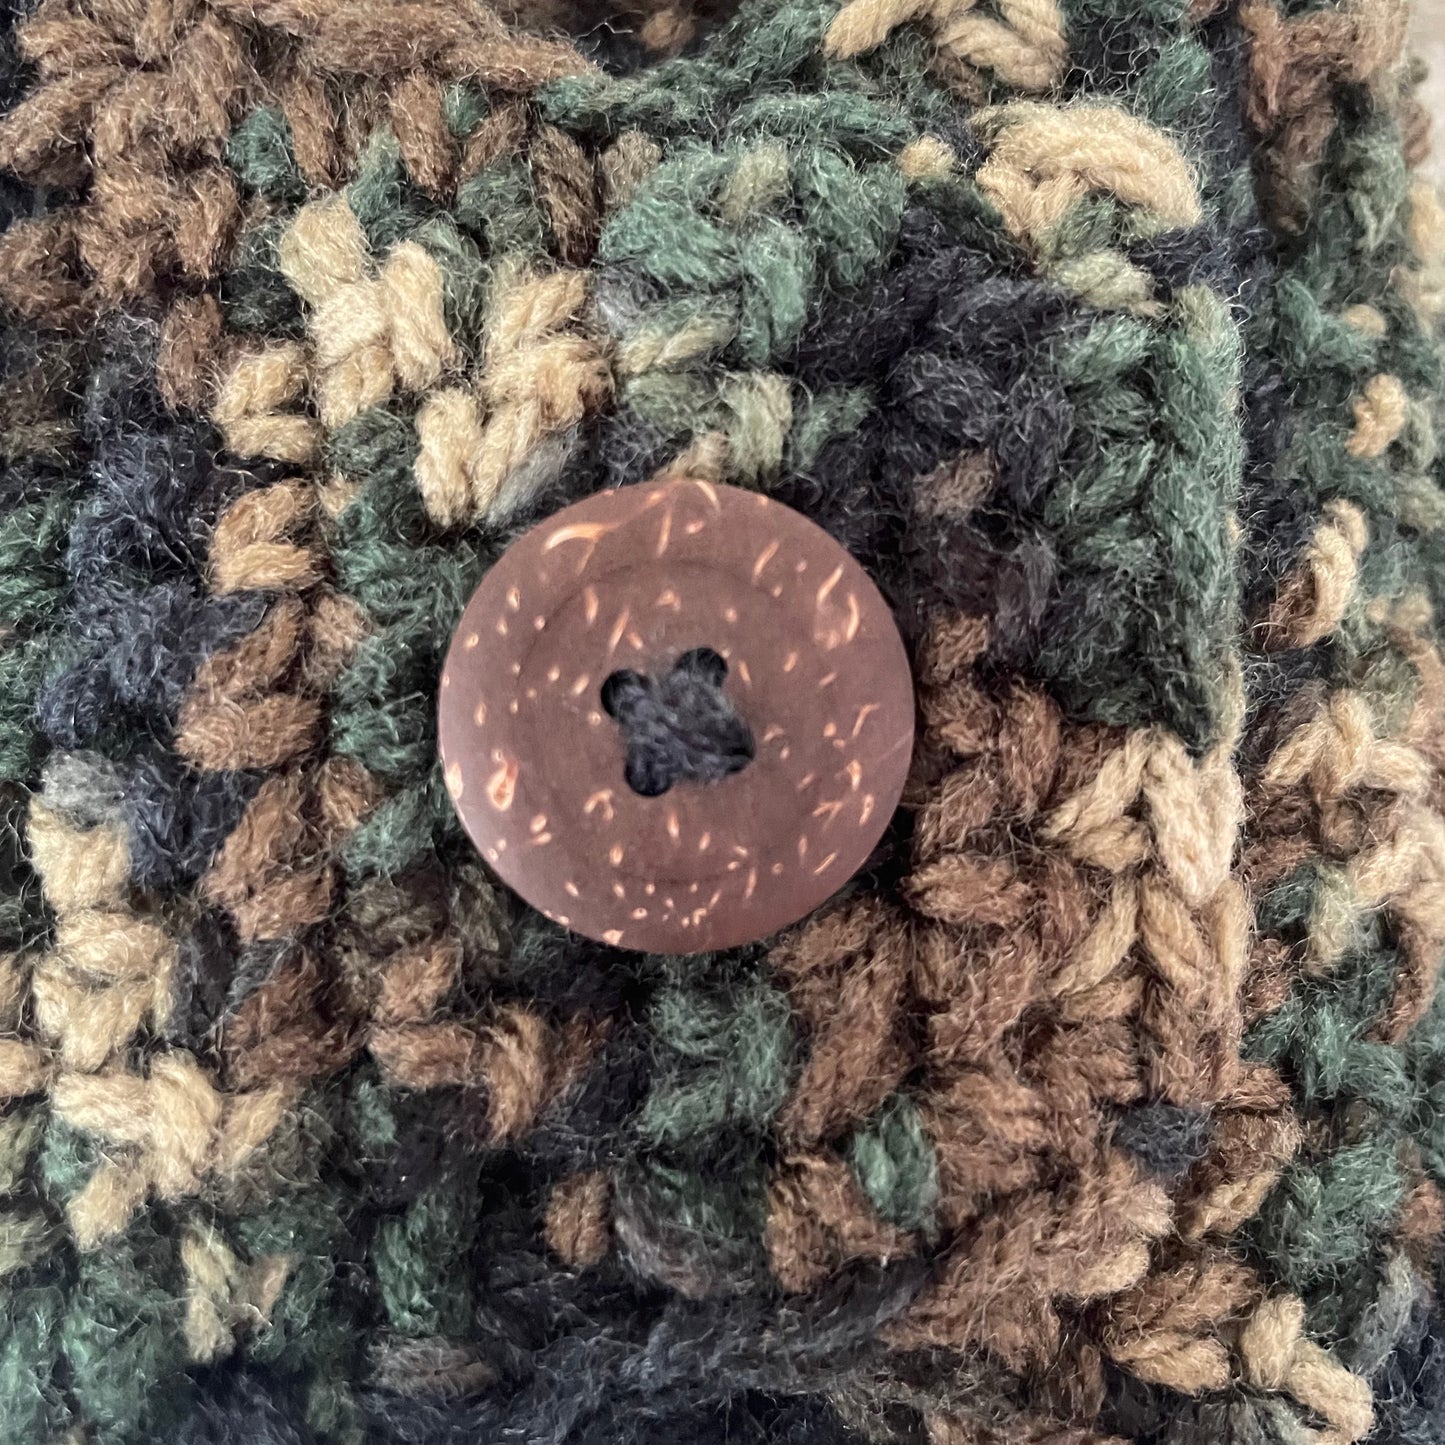 Extra Wide Camouflage Ear Warmer Wood Button Accent 27.5" Fall Winter Outdoor Headband Hand Crocheted Knit